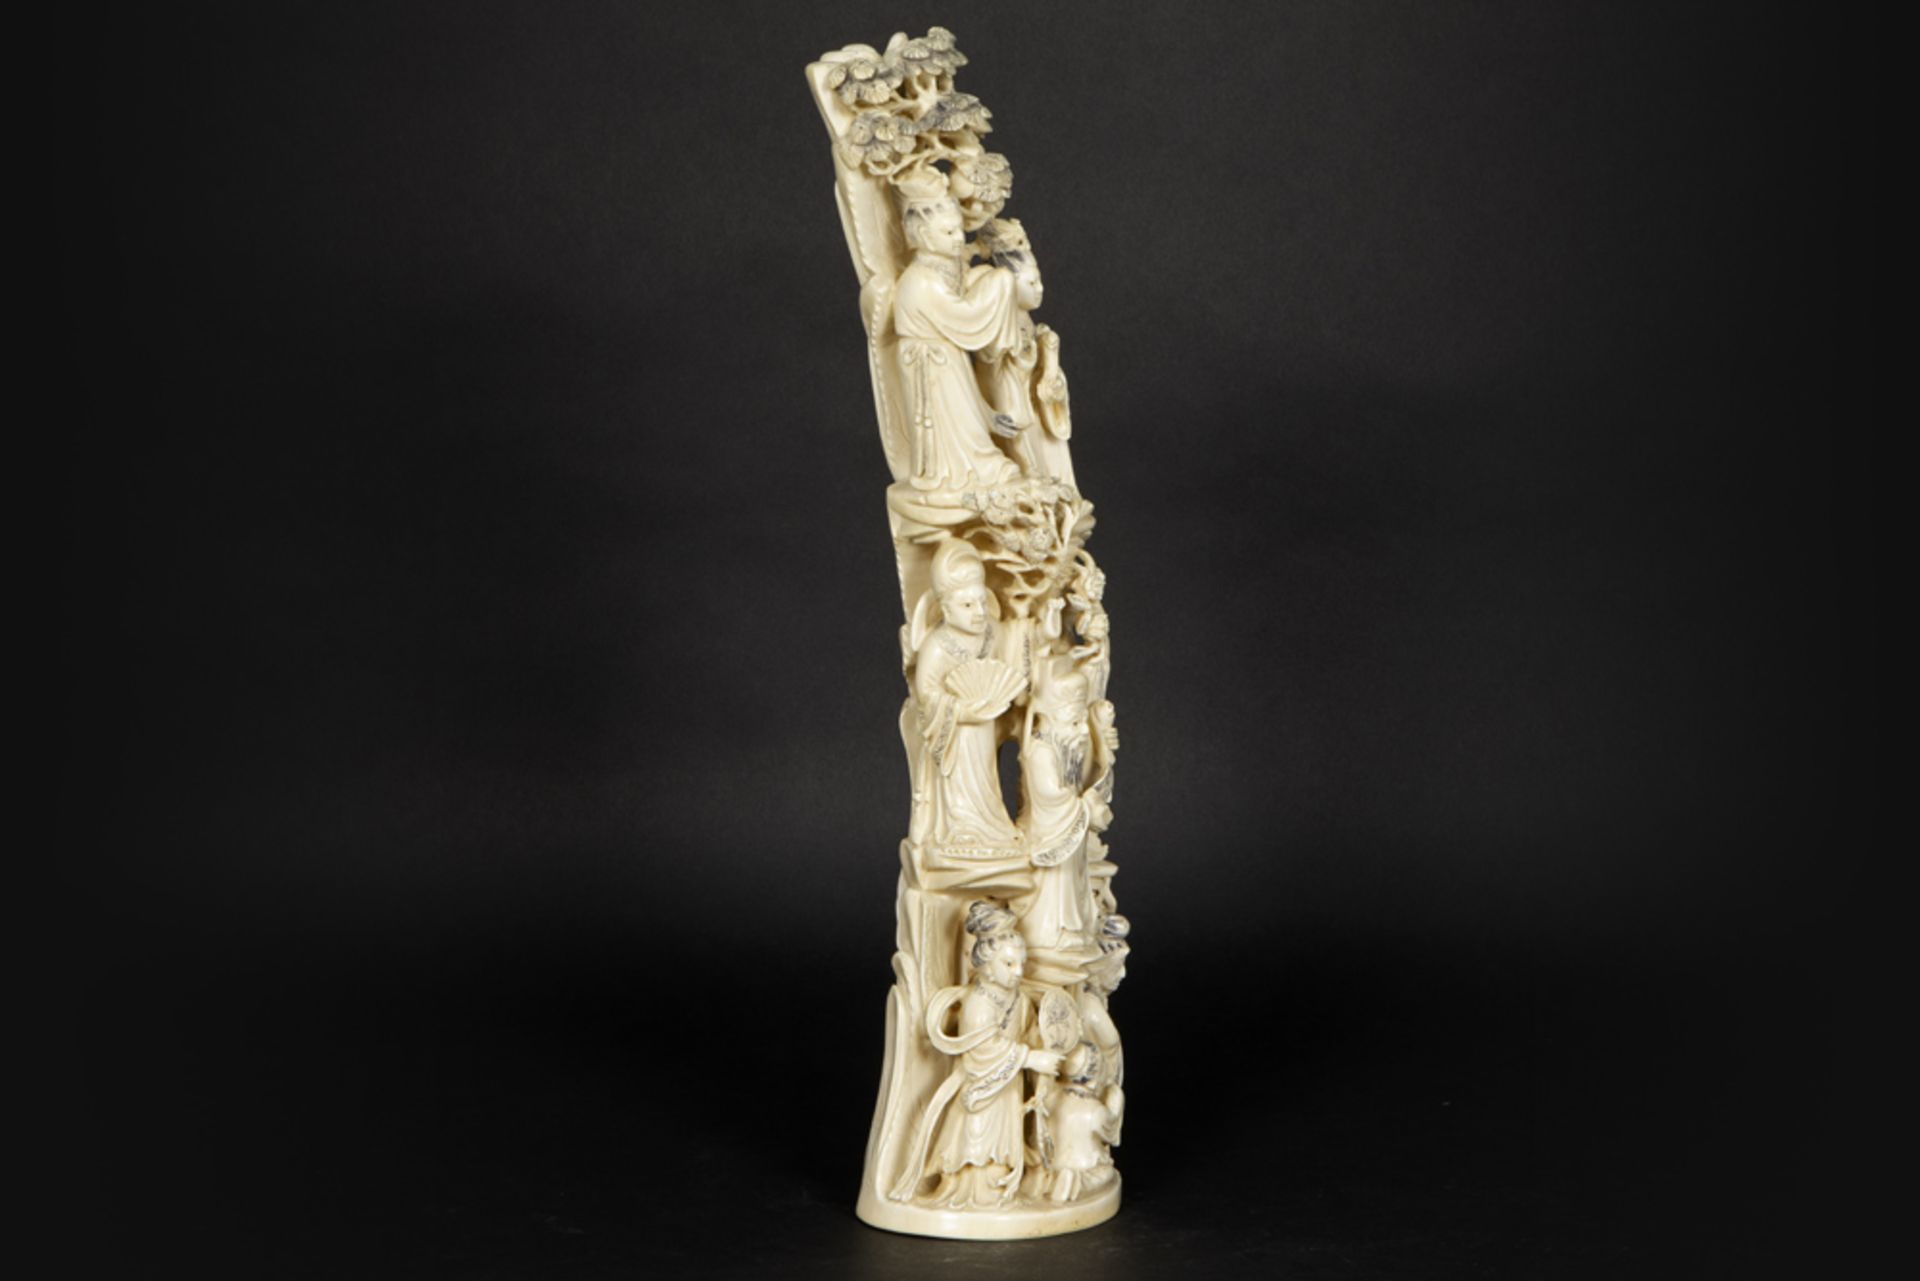 quite big 'antique' Chinese sculpture in ivory depicting a courtly scene with eight figures - ca - Image 4 of 6